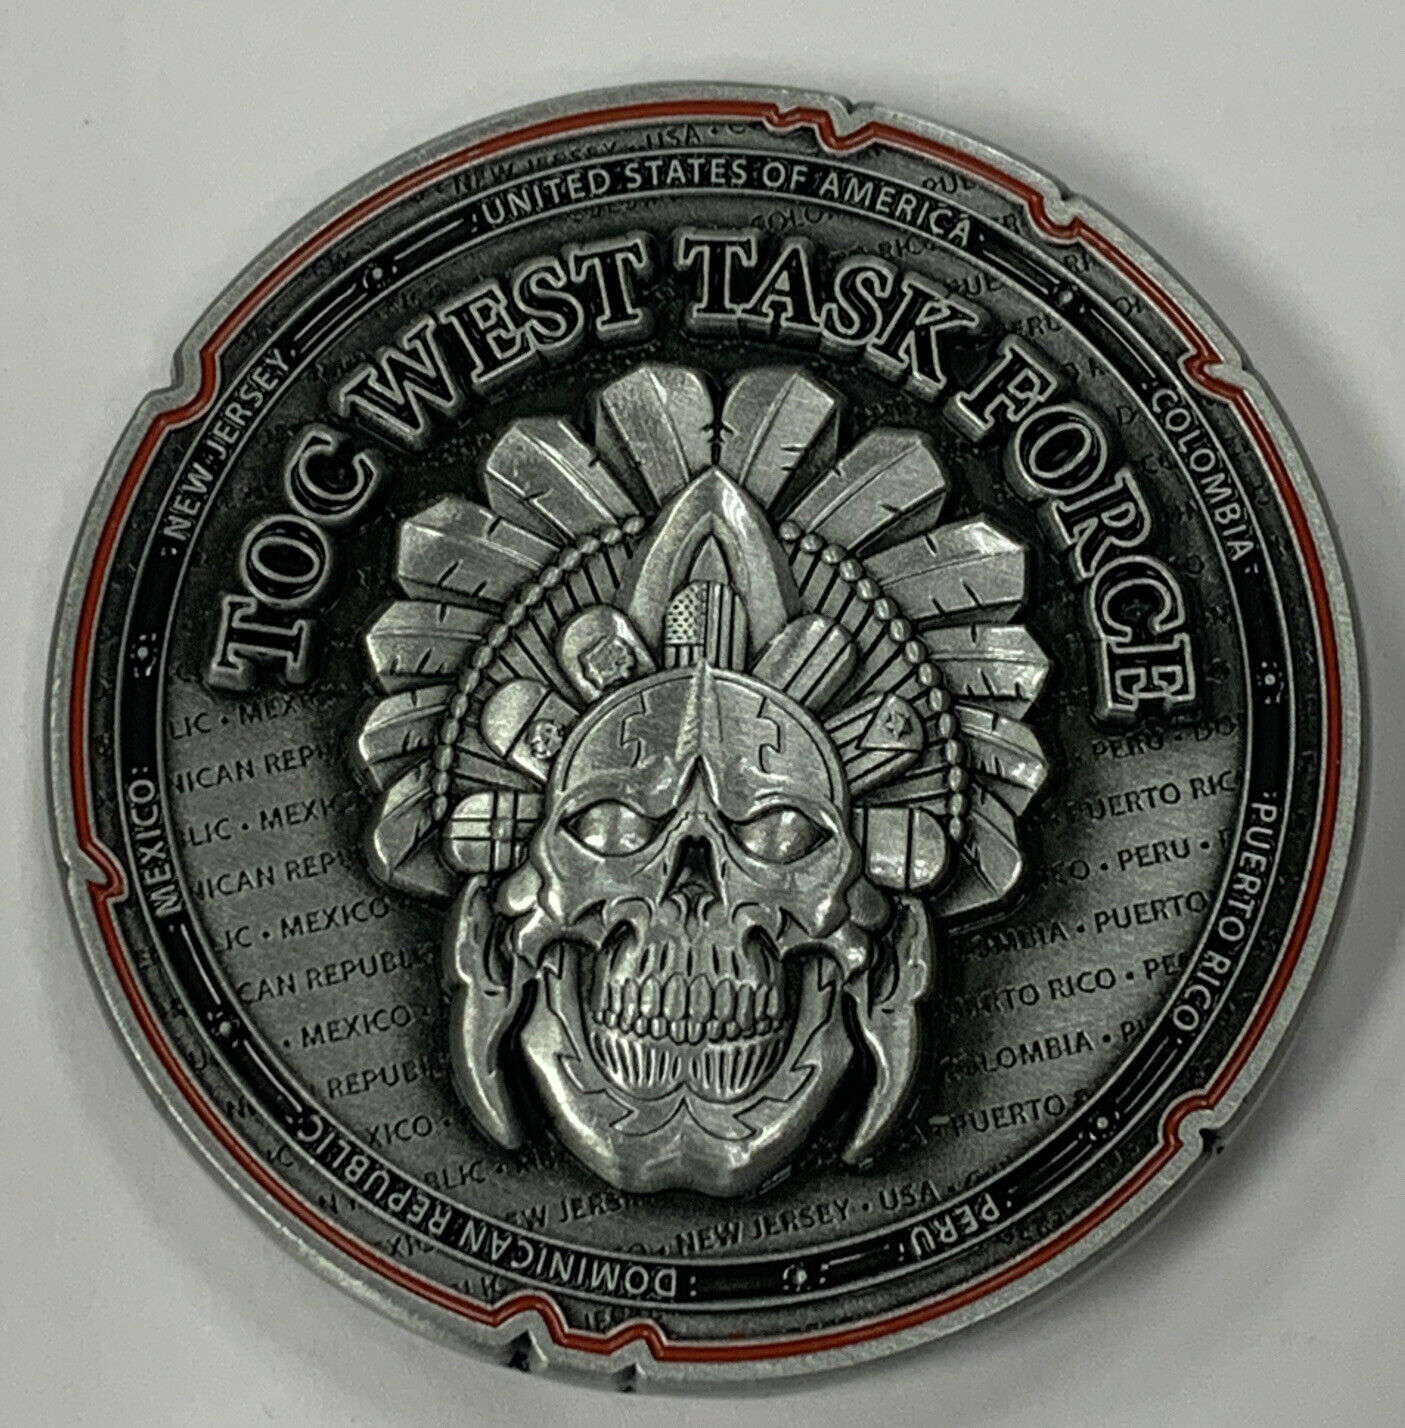 FBI Newark Division TOC West Task Force The Brick City Challenge Coin